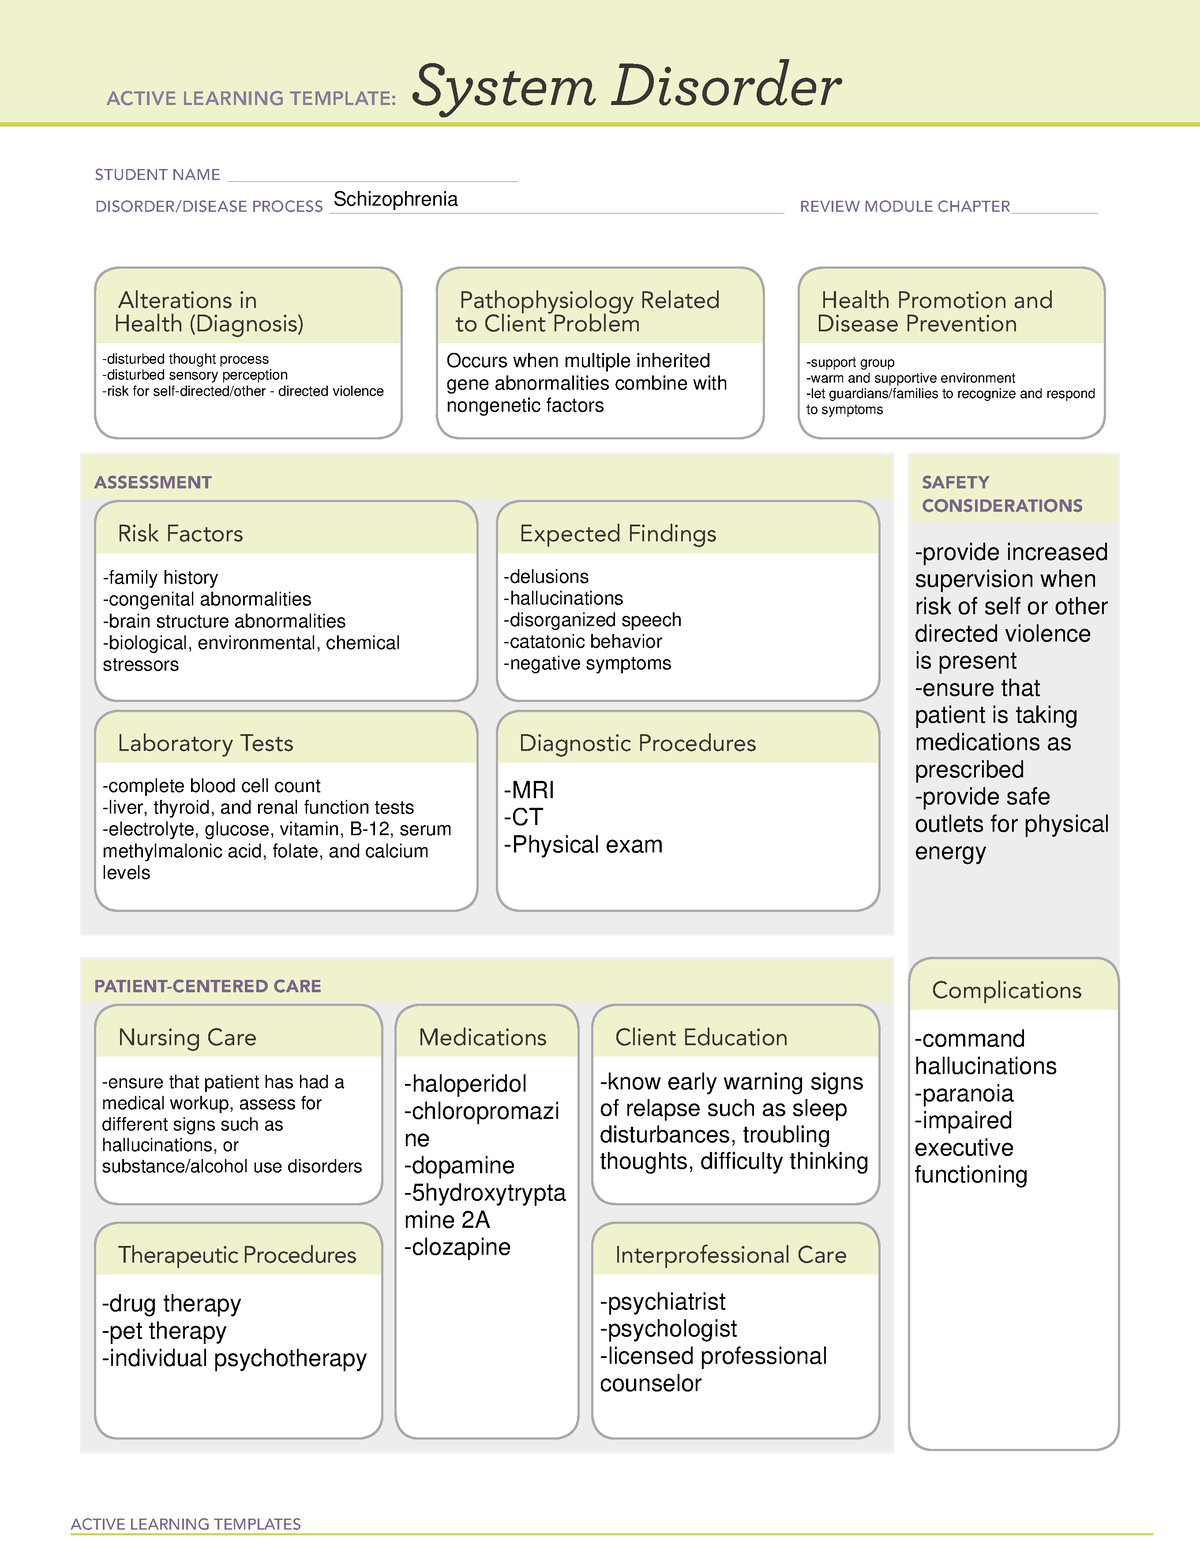 Schizophrenia system disorder ati template ACTIVE LEARNING TEMPLATES